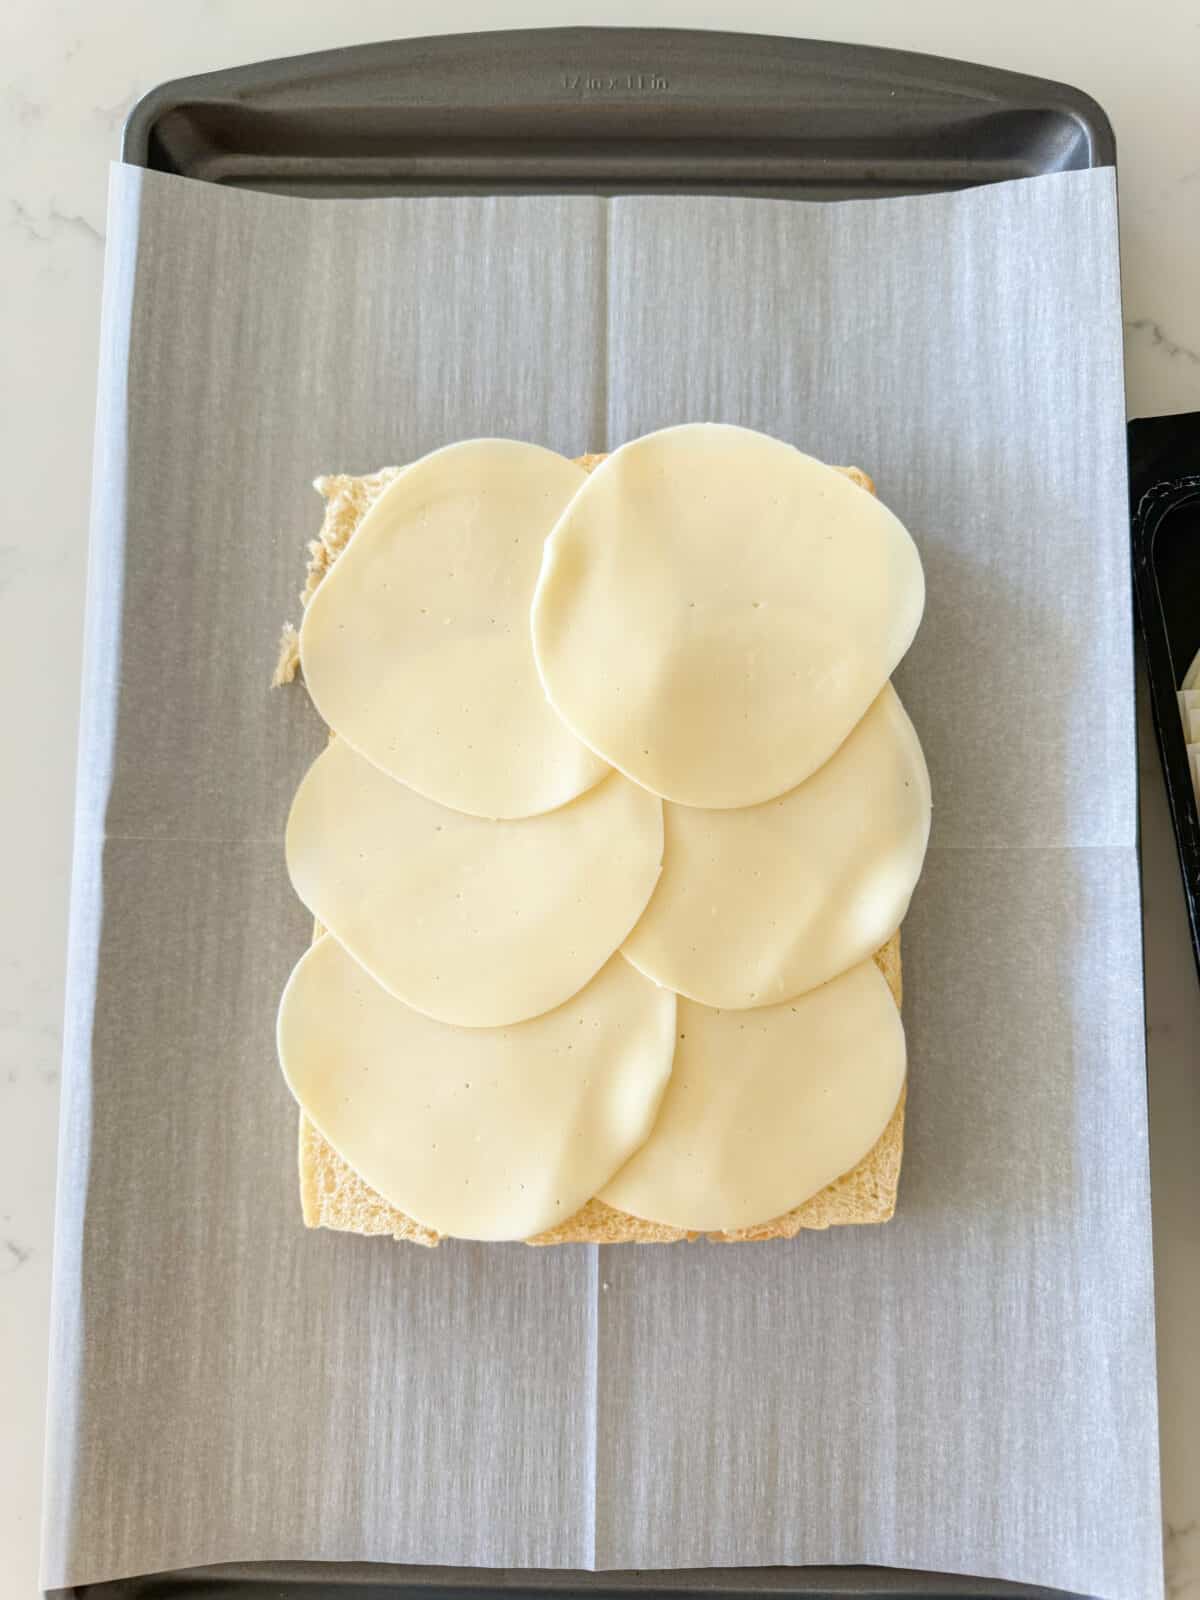 provolone slices added to hawaiian rolls